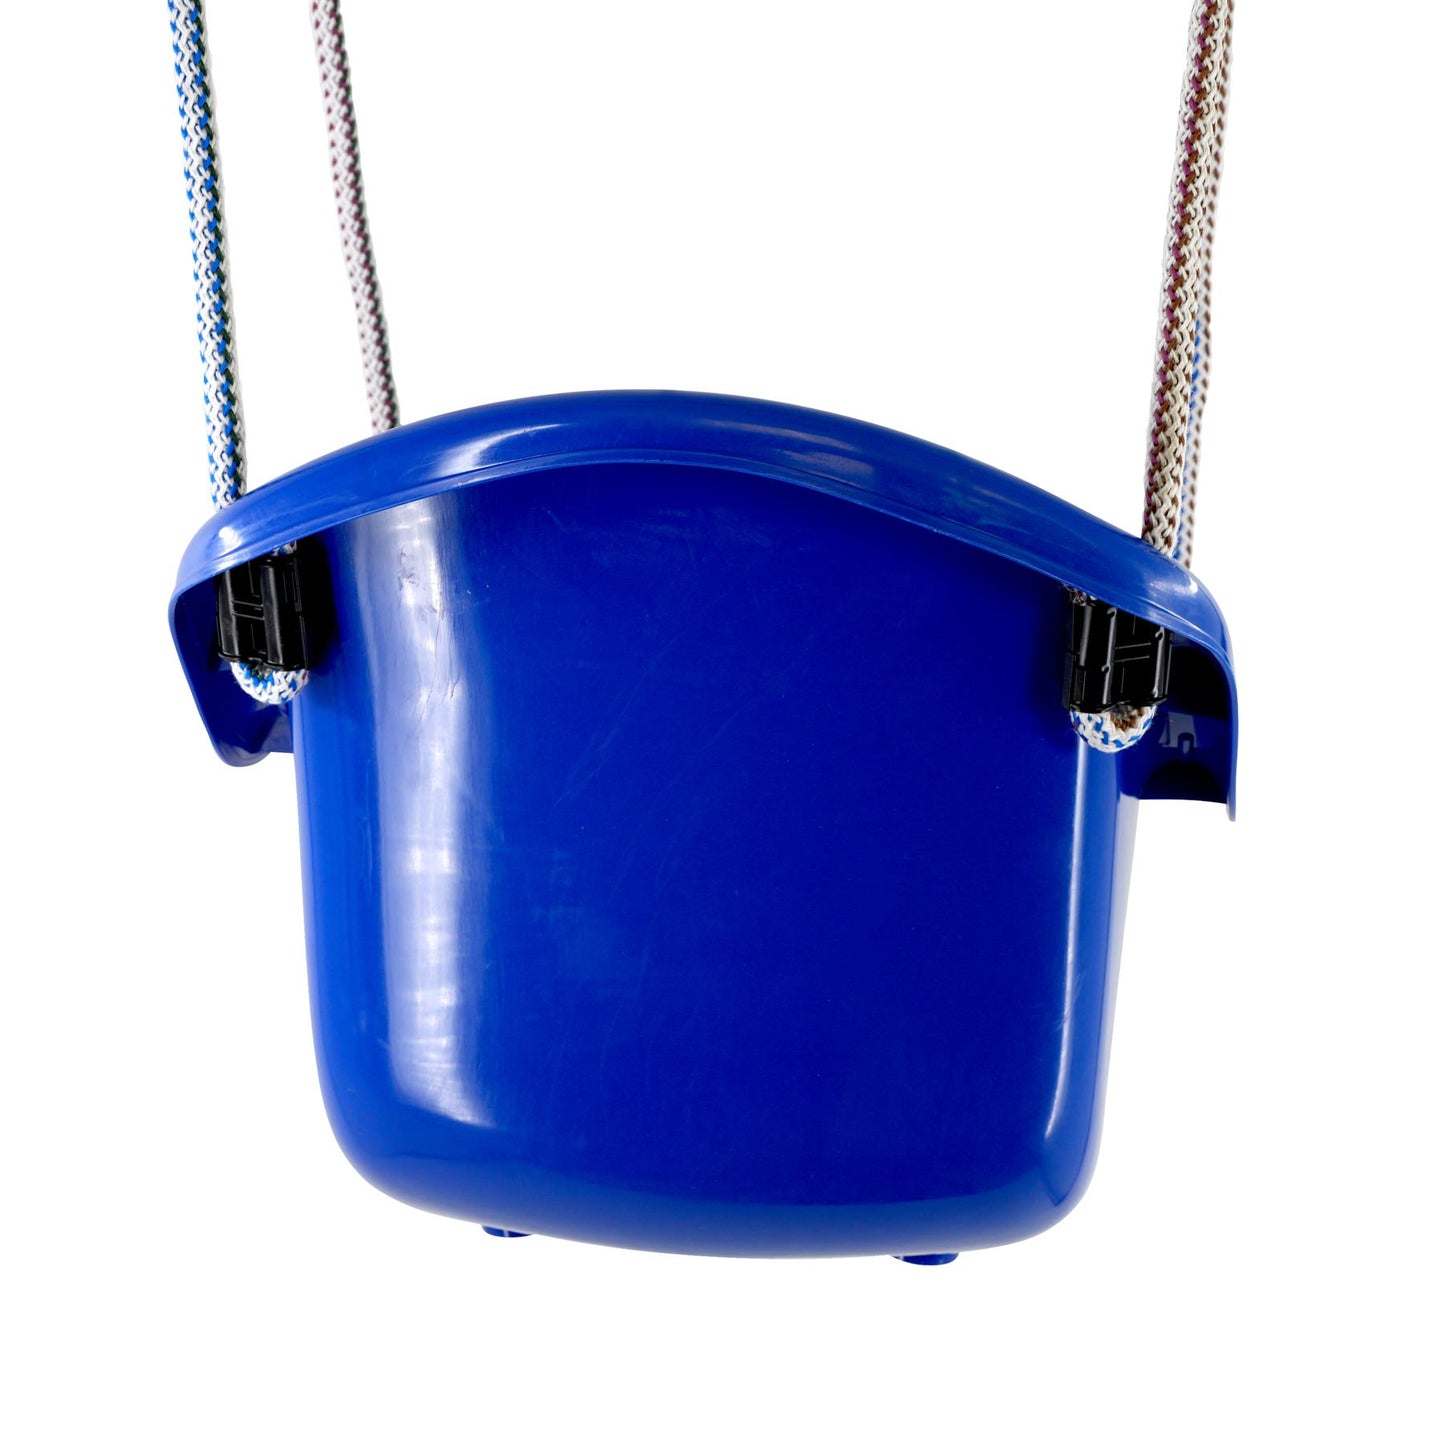 Blue Children's Safety Swing Seat by MTS - UKBuyZone